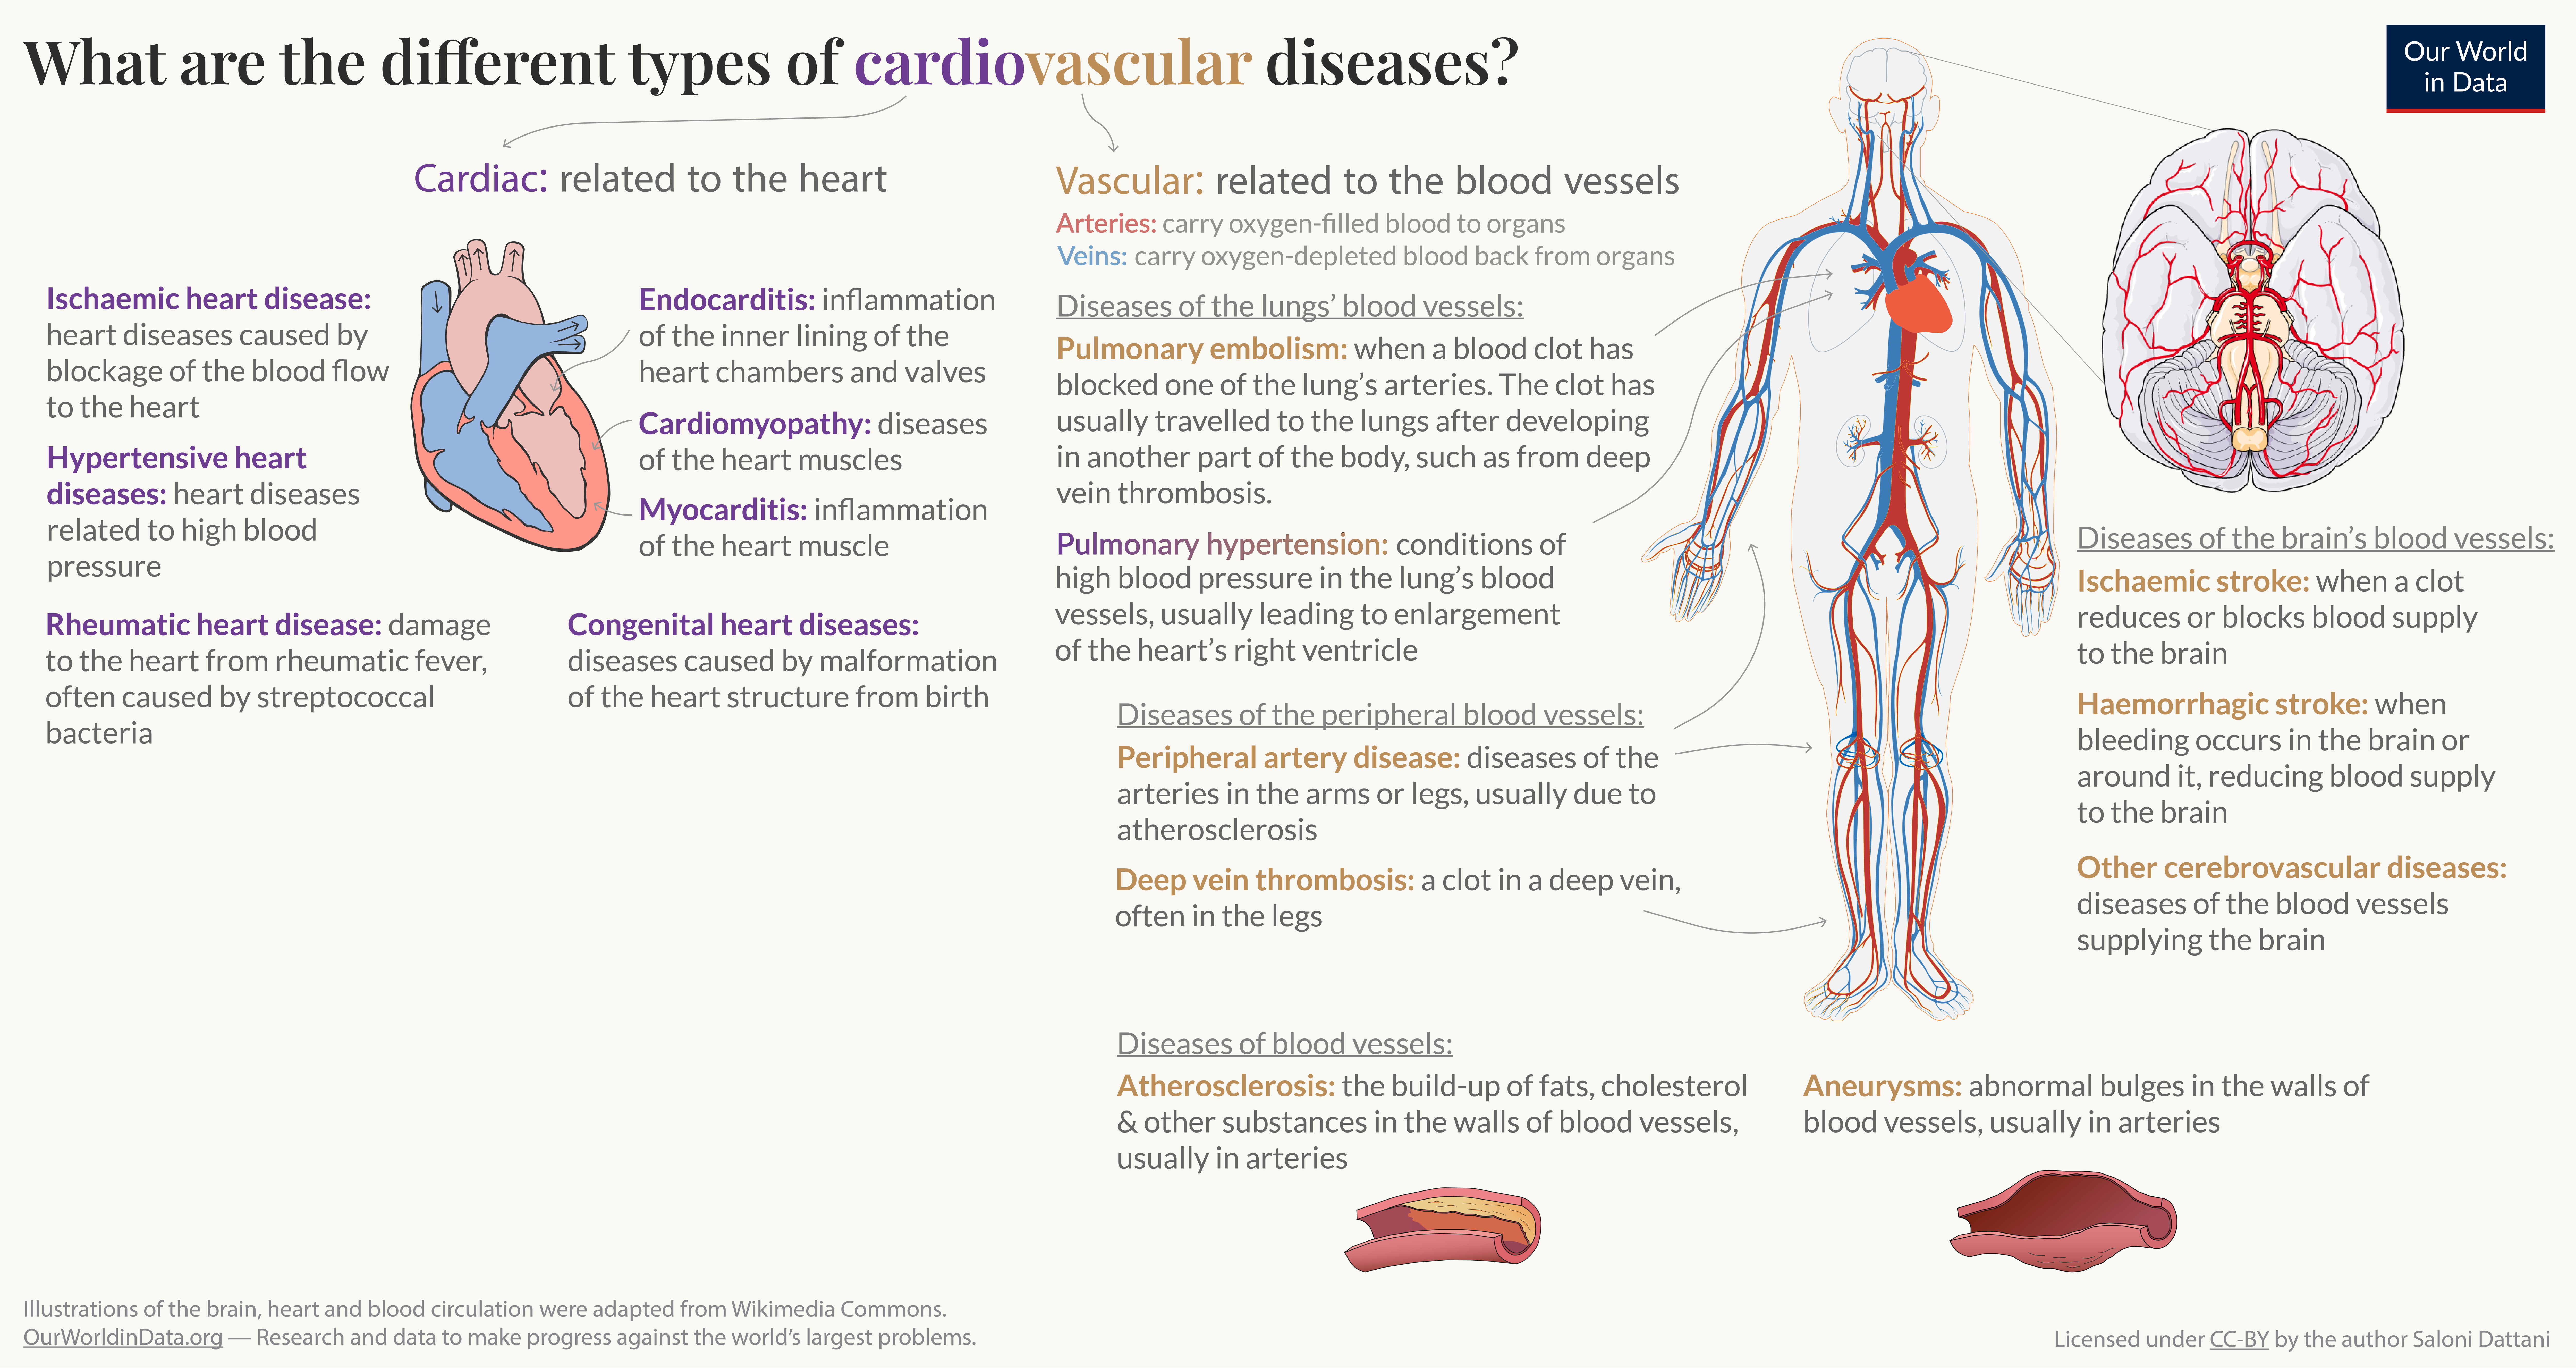 Illustration of different types of cardiovascular diseases